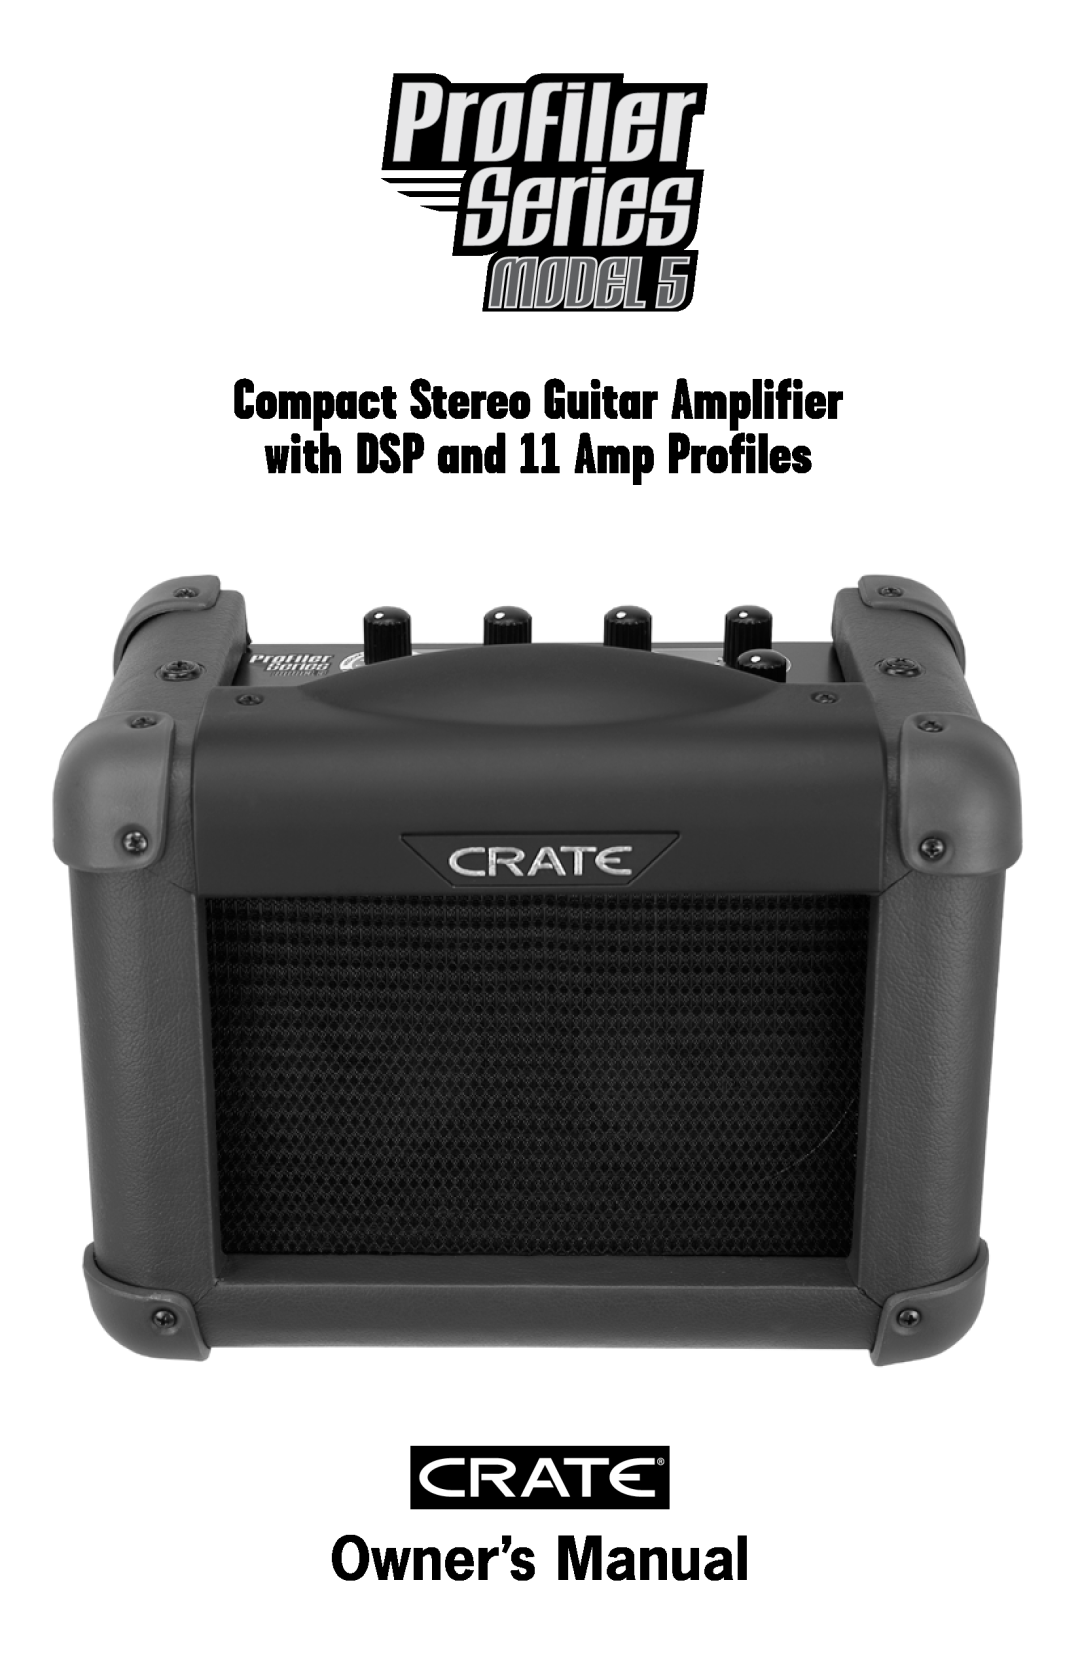 Crate Amplifiers 5 owner manual Model, with DSP and 11 Amp Profiles, Compact Stereo Guitar Amplifier 